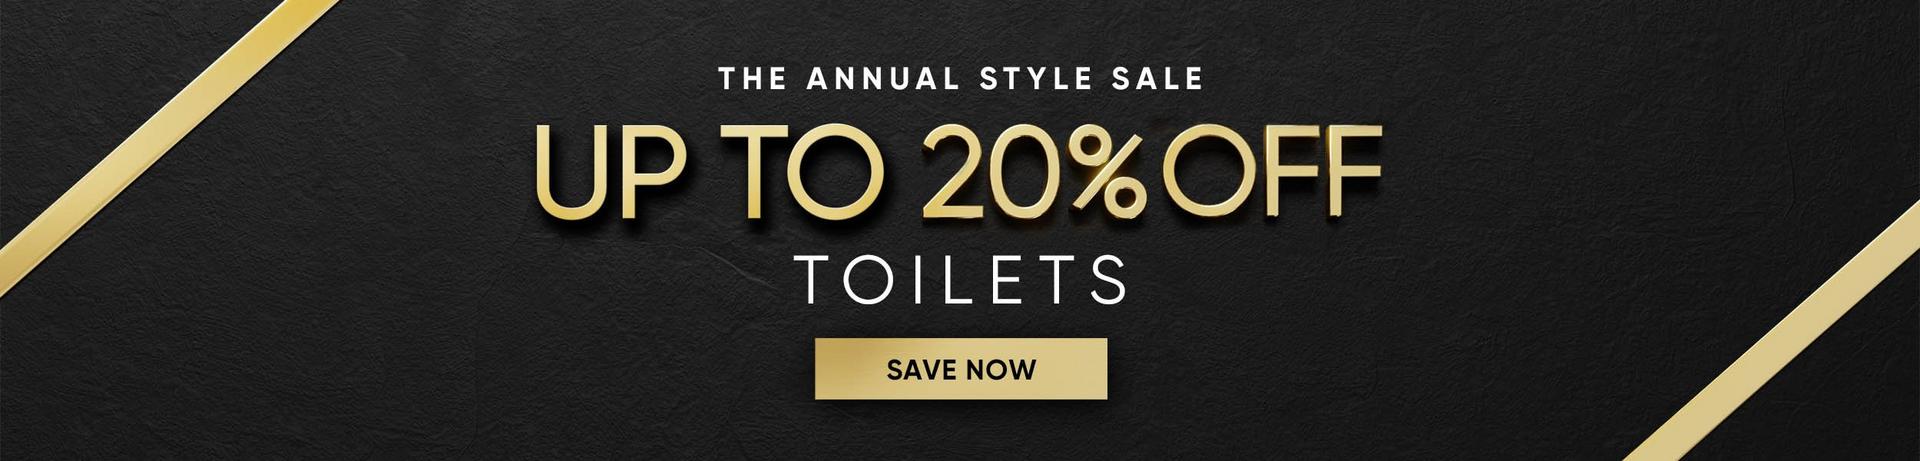 The Annual Style Sale - Up to 20% Off Toilets